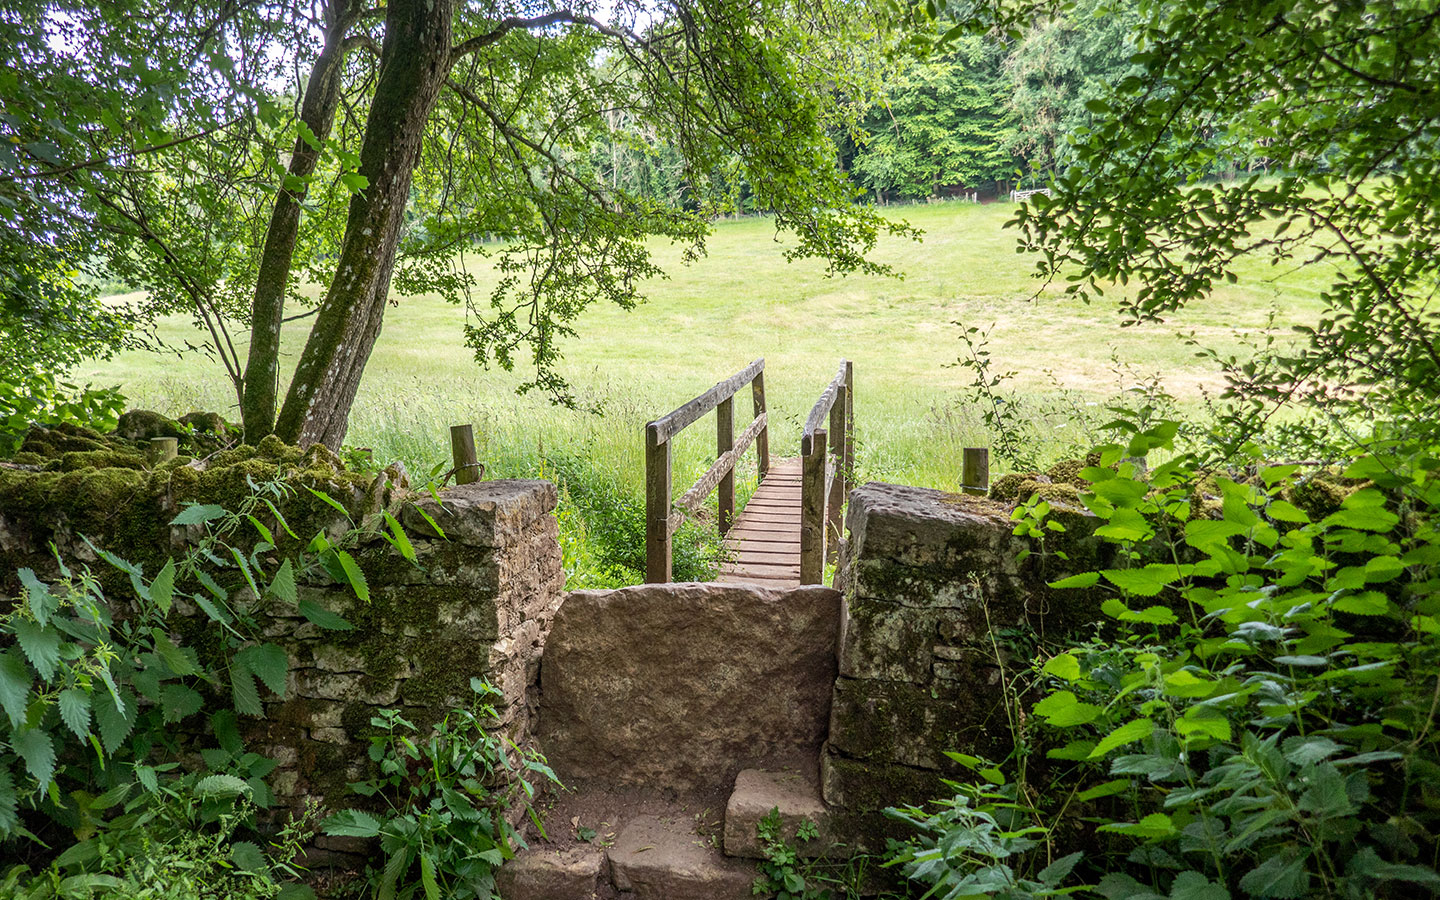 Stone stile on the Coln St Aldwyns to Bibury walk in the Cotswolds 